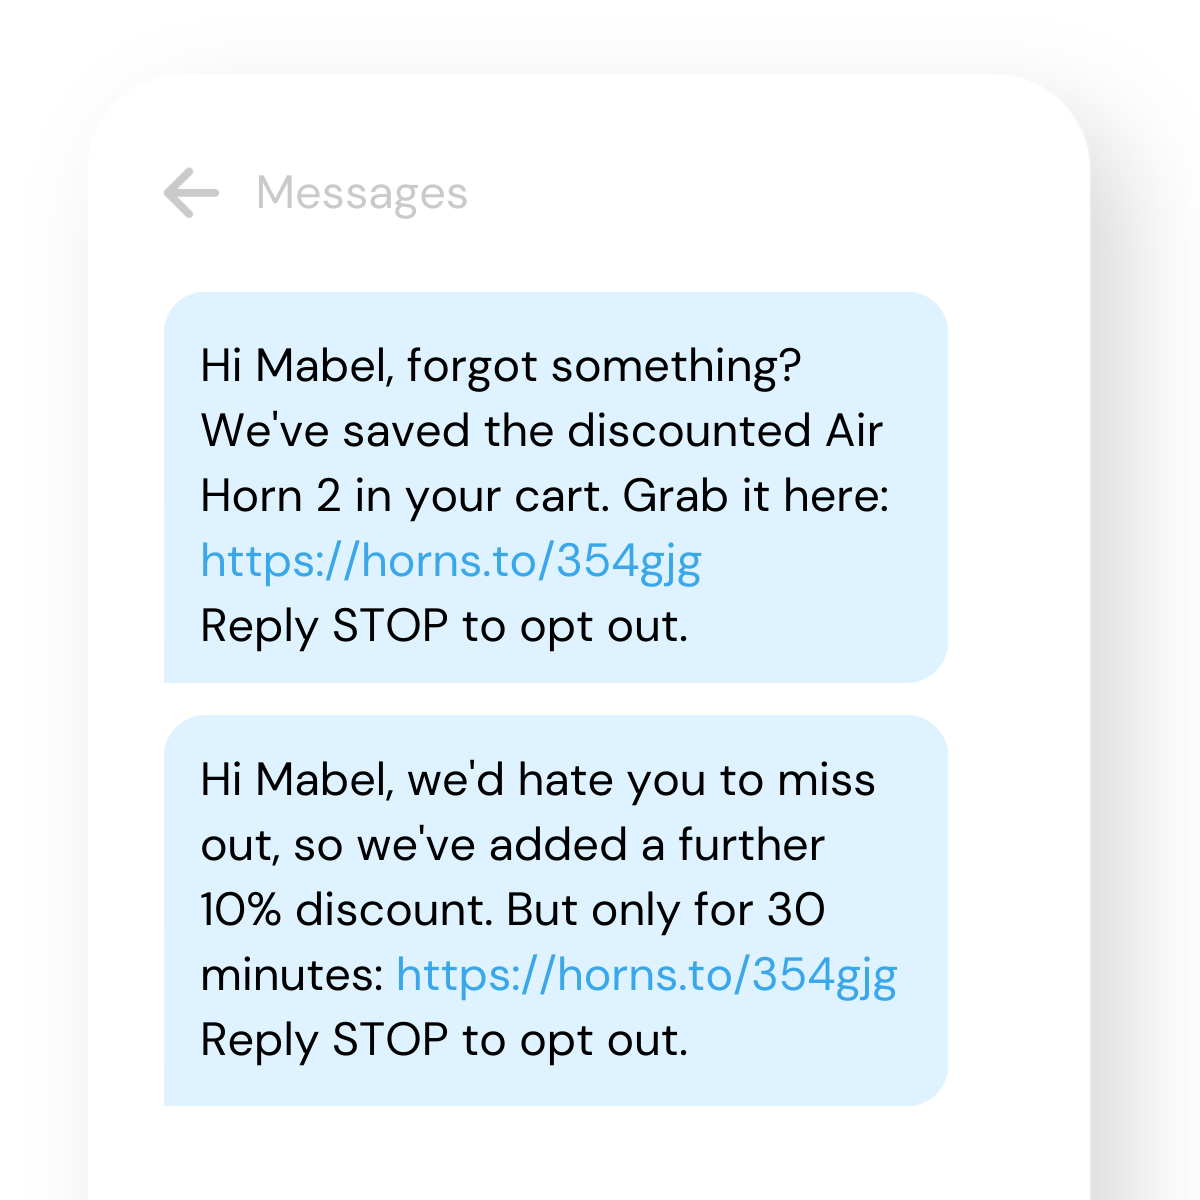 SMS-marketing-example-abandoned-cart-follow-up